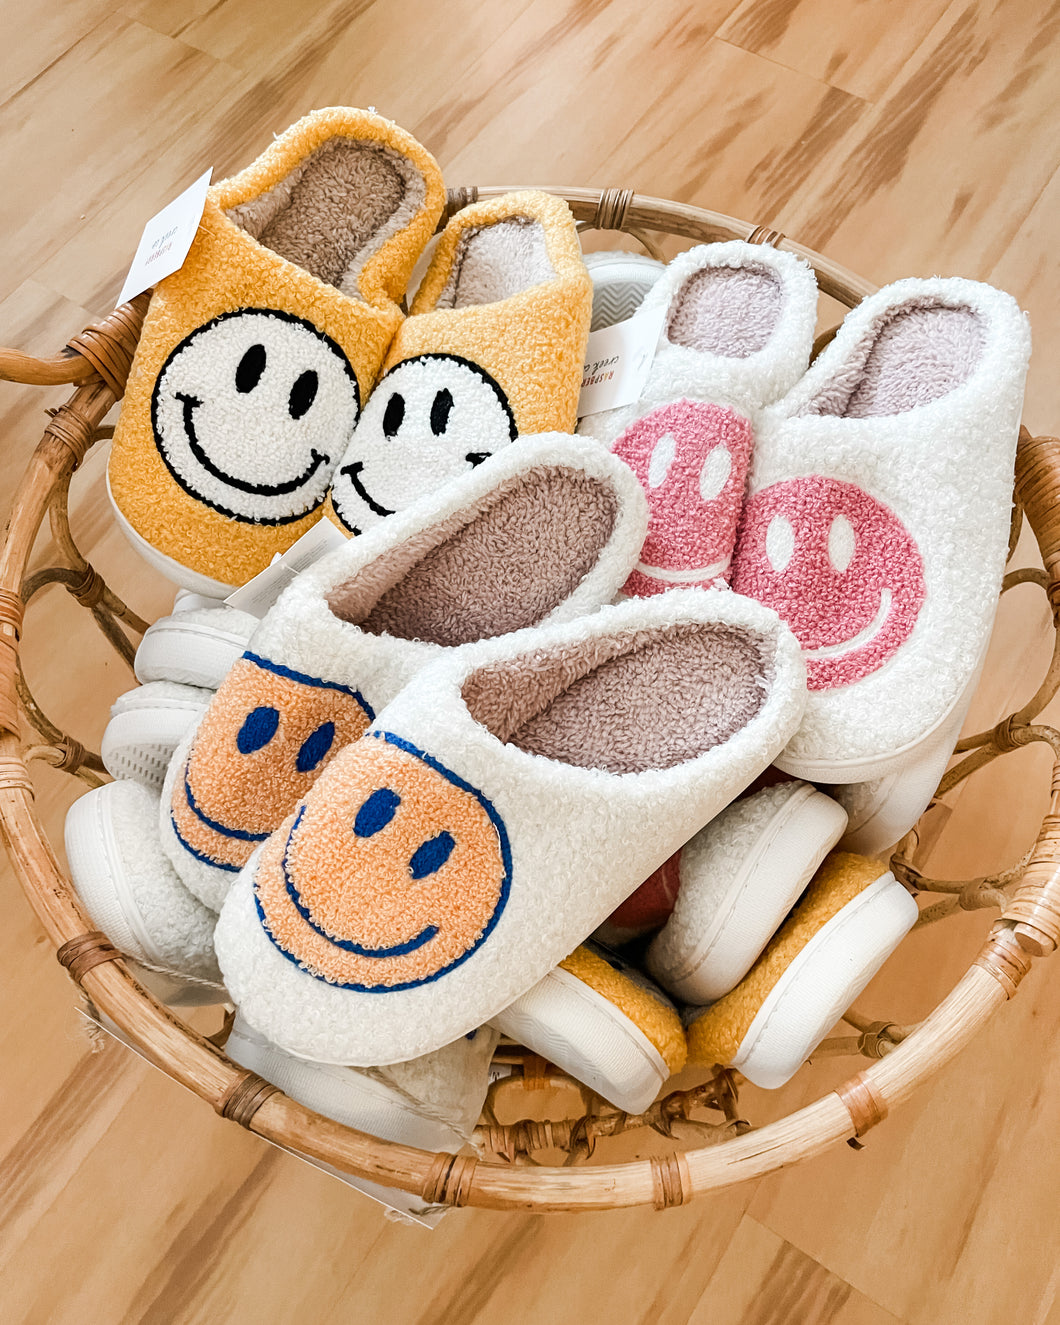 Retro Smiley Face Slippers - Womens